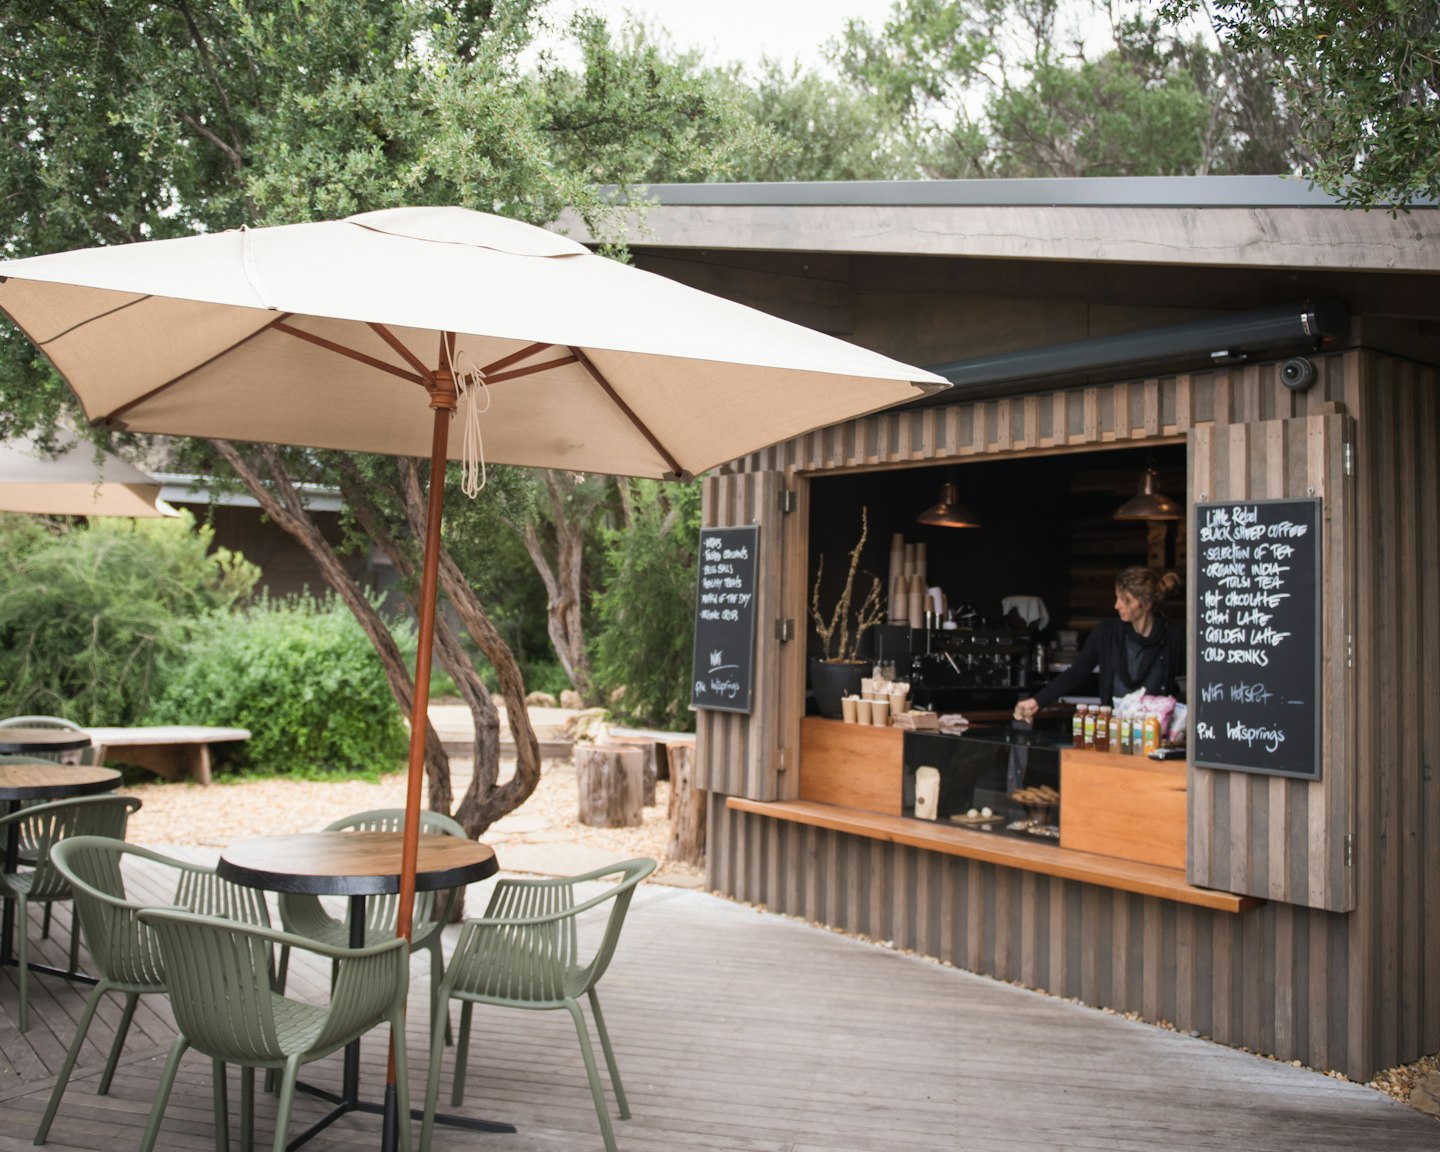 coffee hut with outdoor tables, chairs and umbrellas